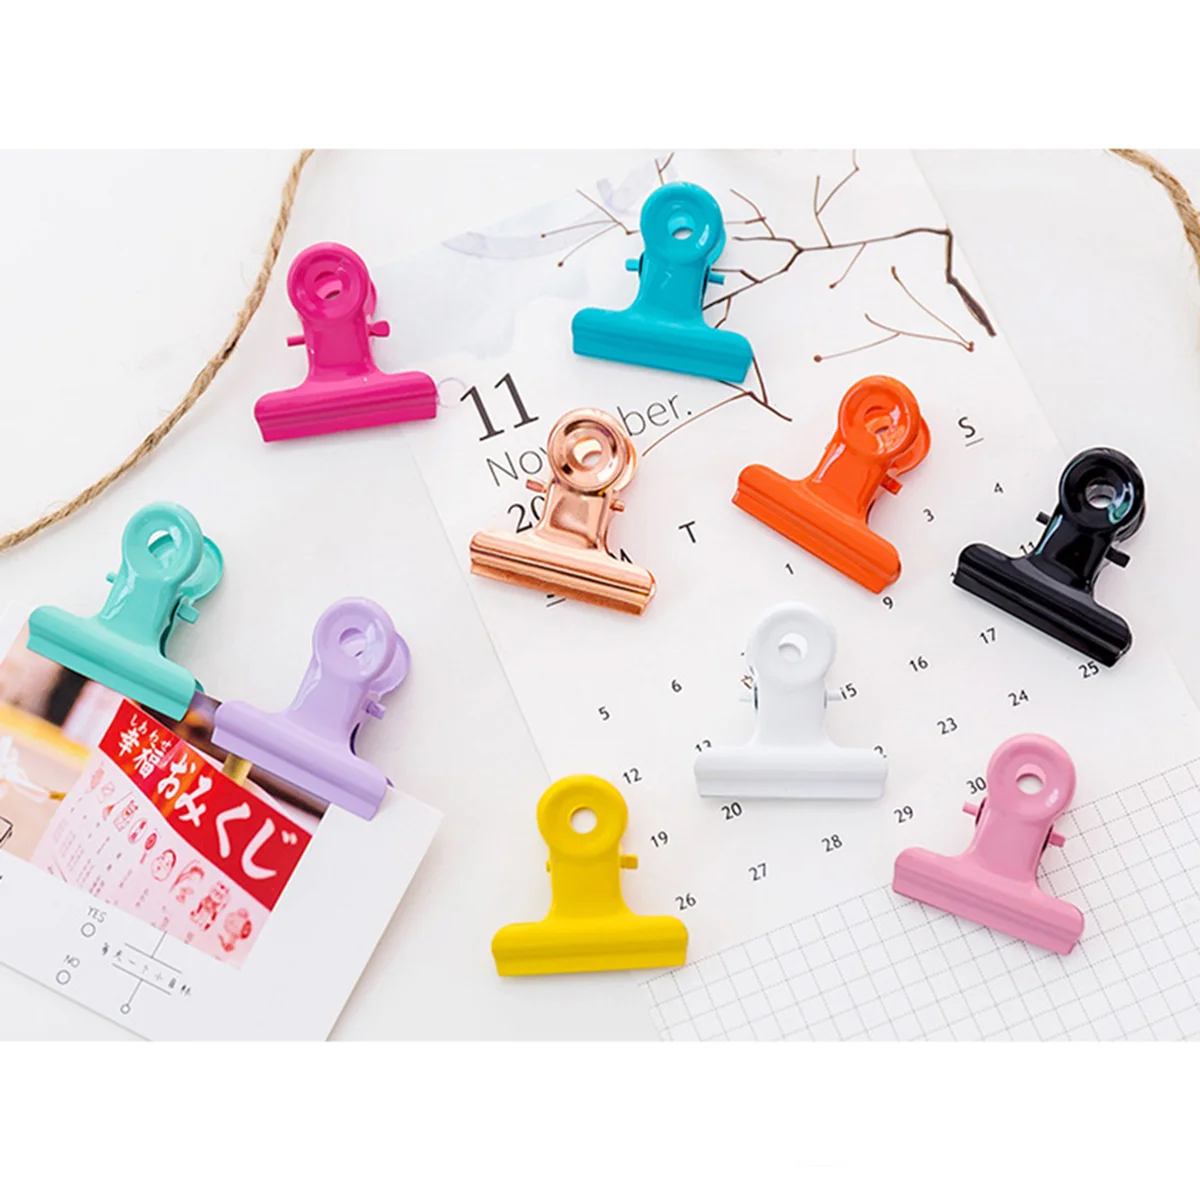 

10 pcs Receipt Clip Candy Color Invoice Clip Simple Organizer Clip for Home Office (Mixed Color)